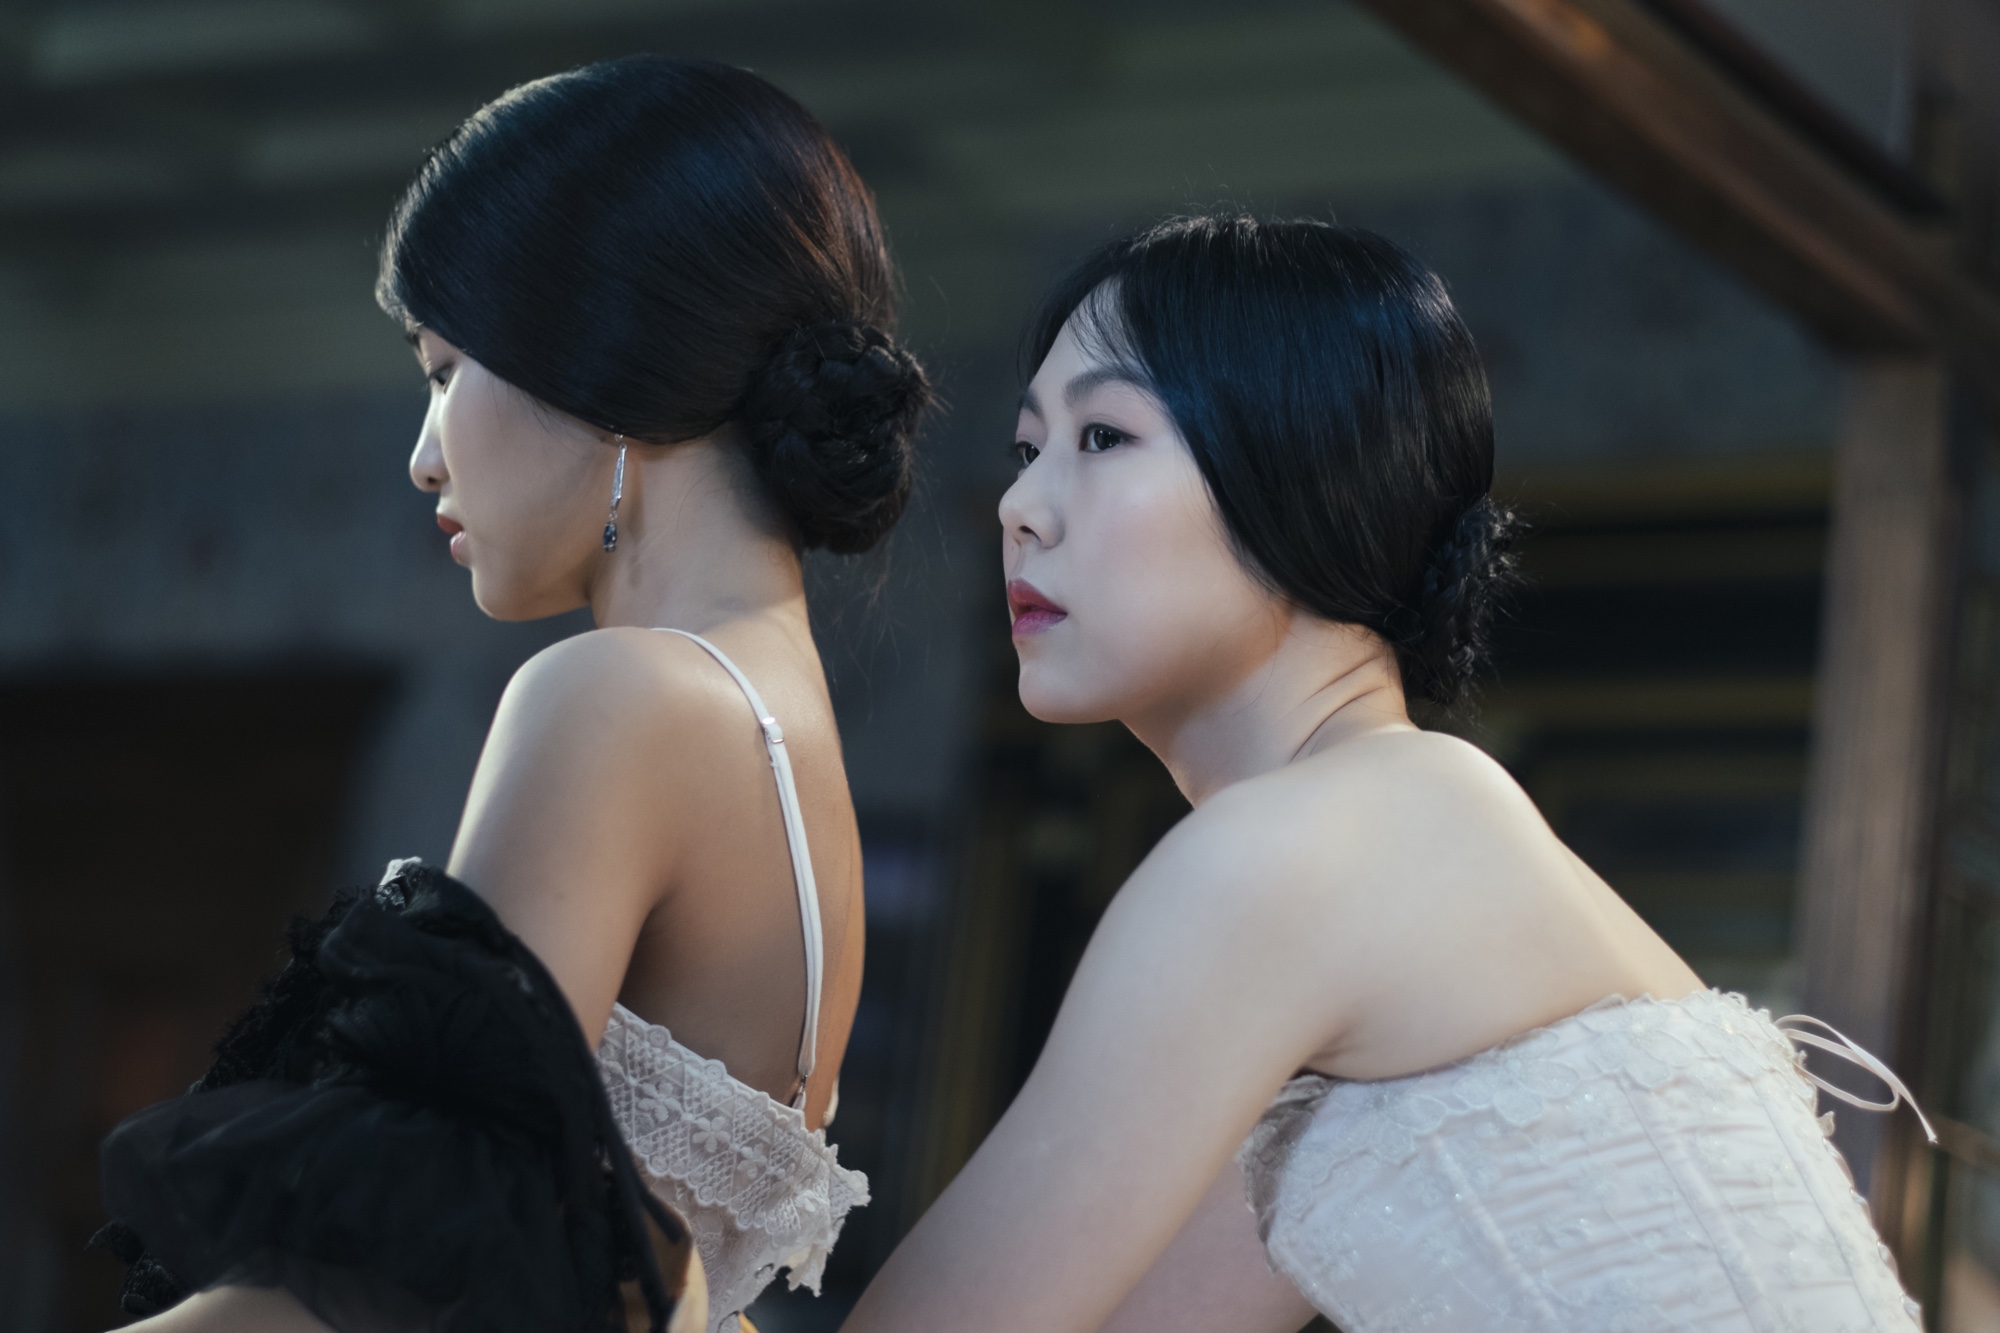 Movies to watch during Pride: the handmaiden